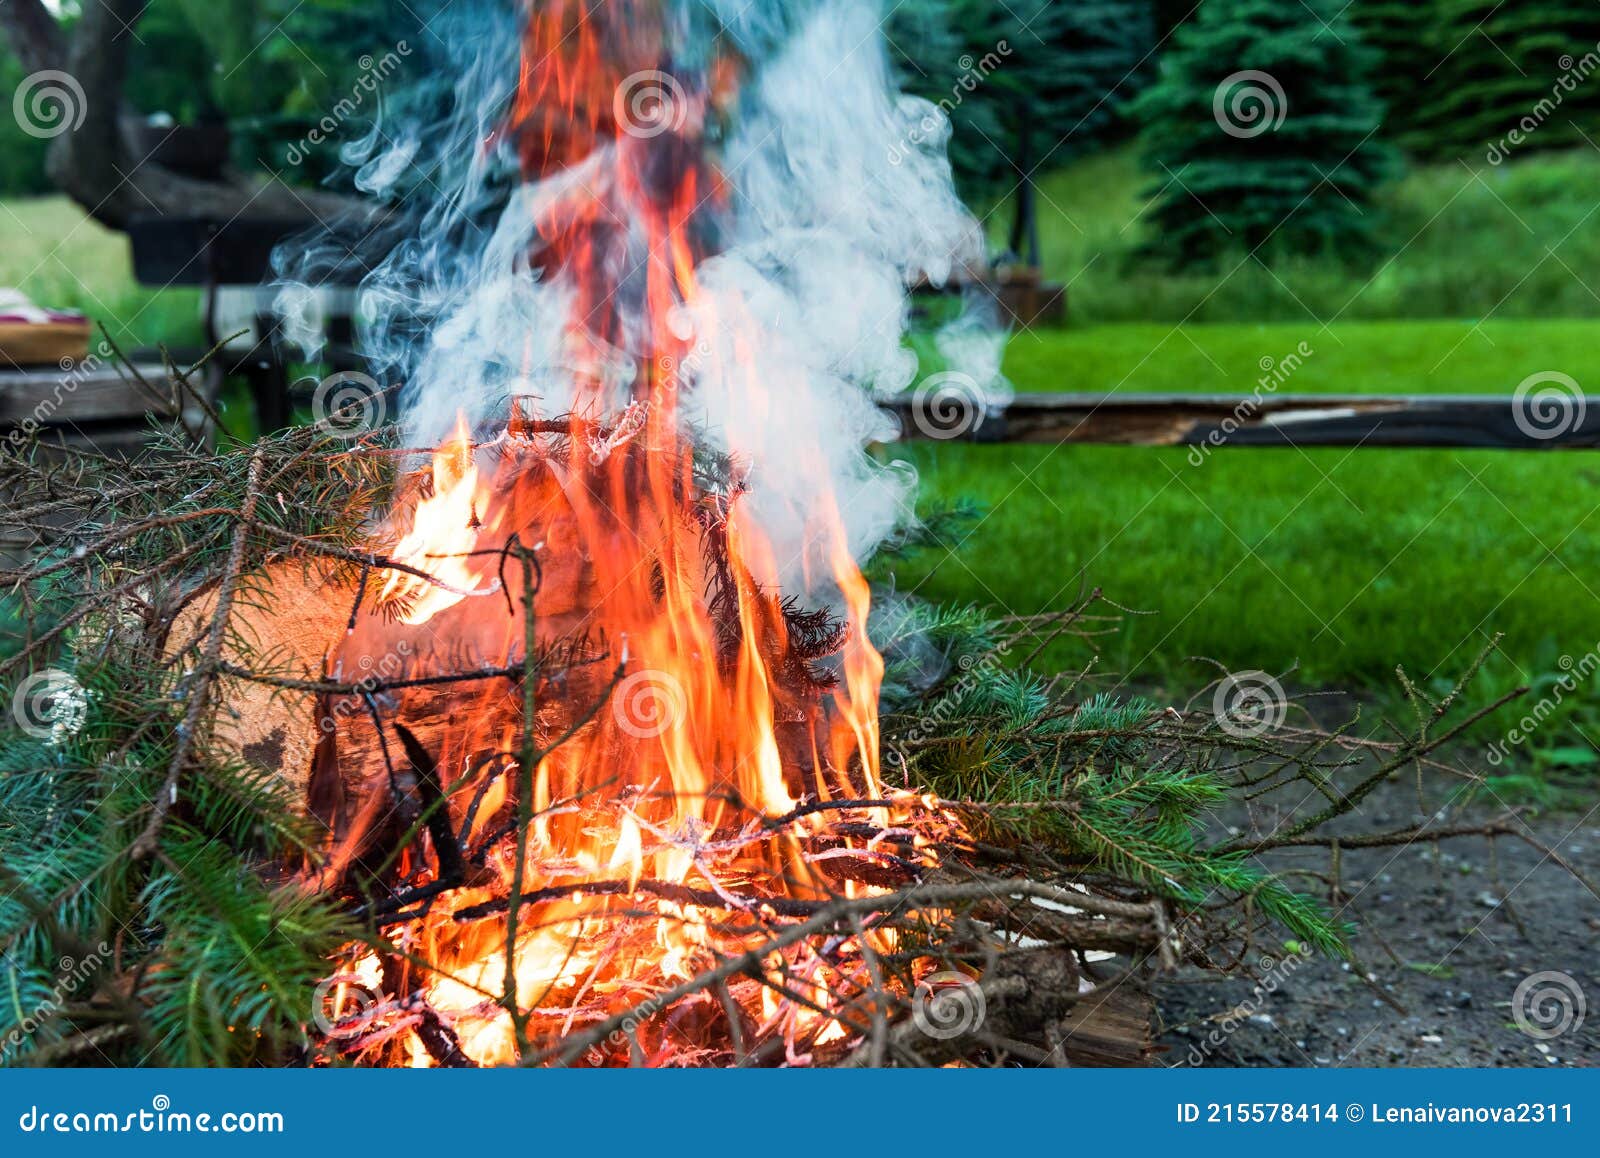 Late Evening Campfire. Burning Bonfire in the Evening Stock Photo ...